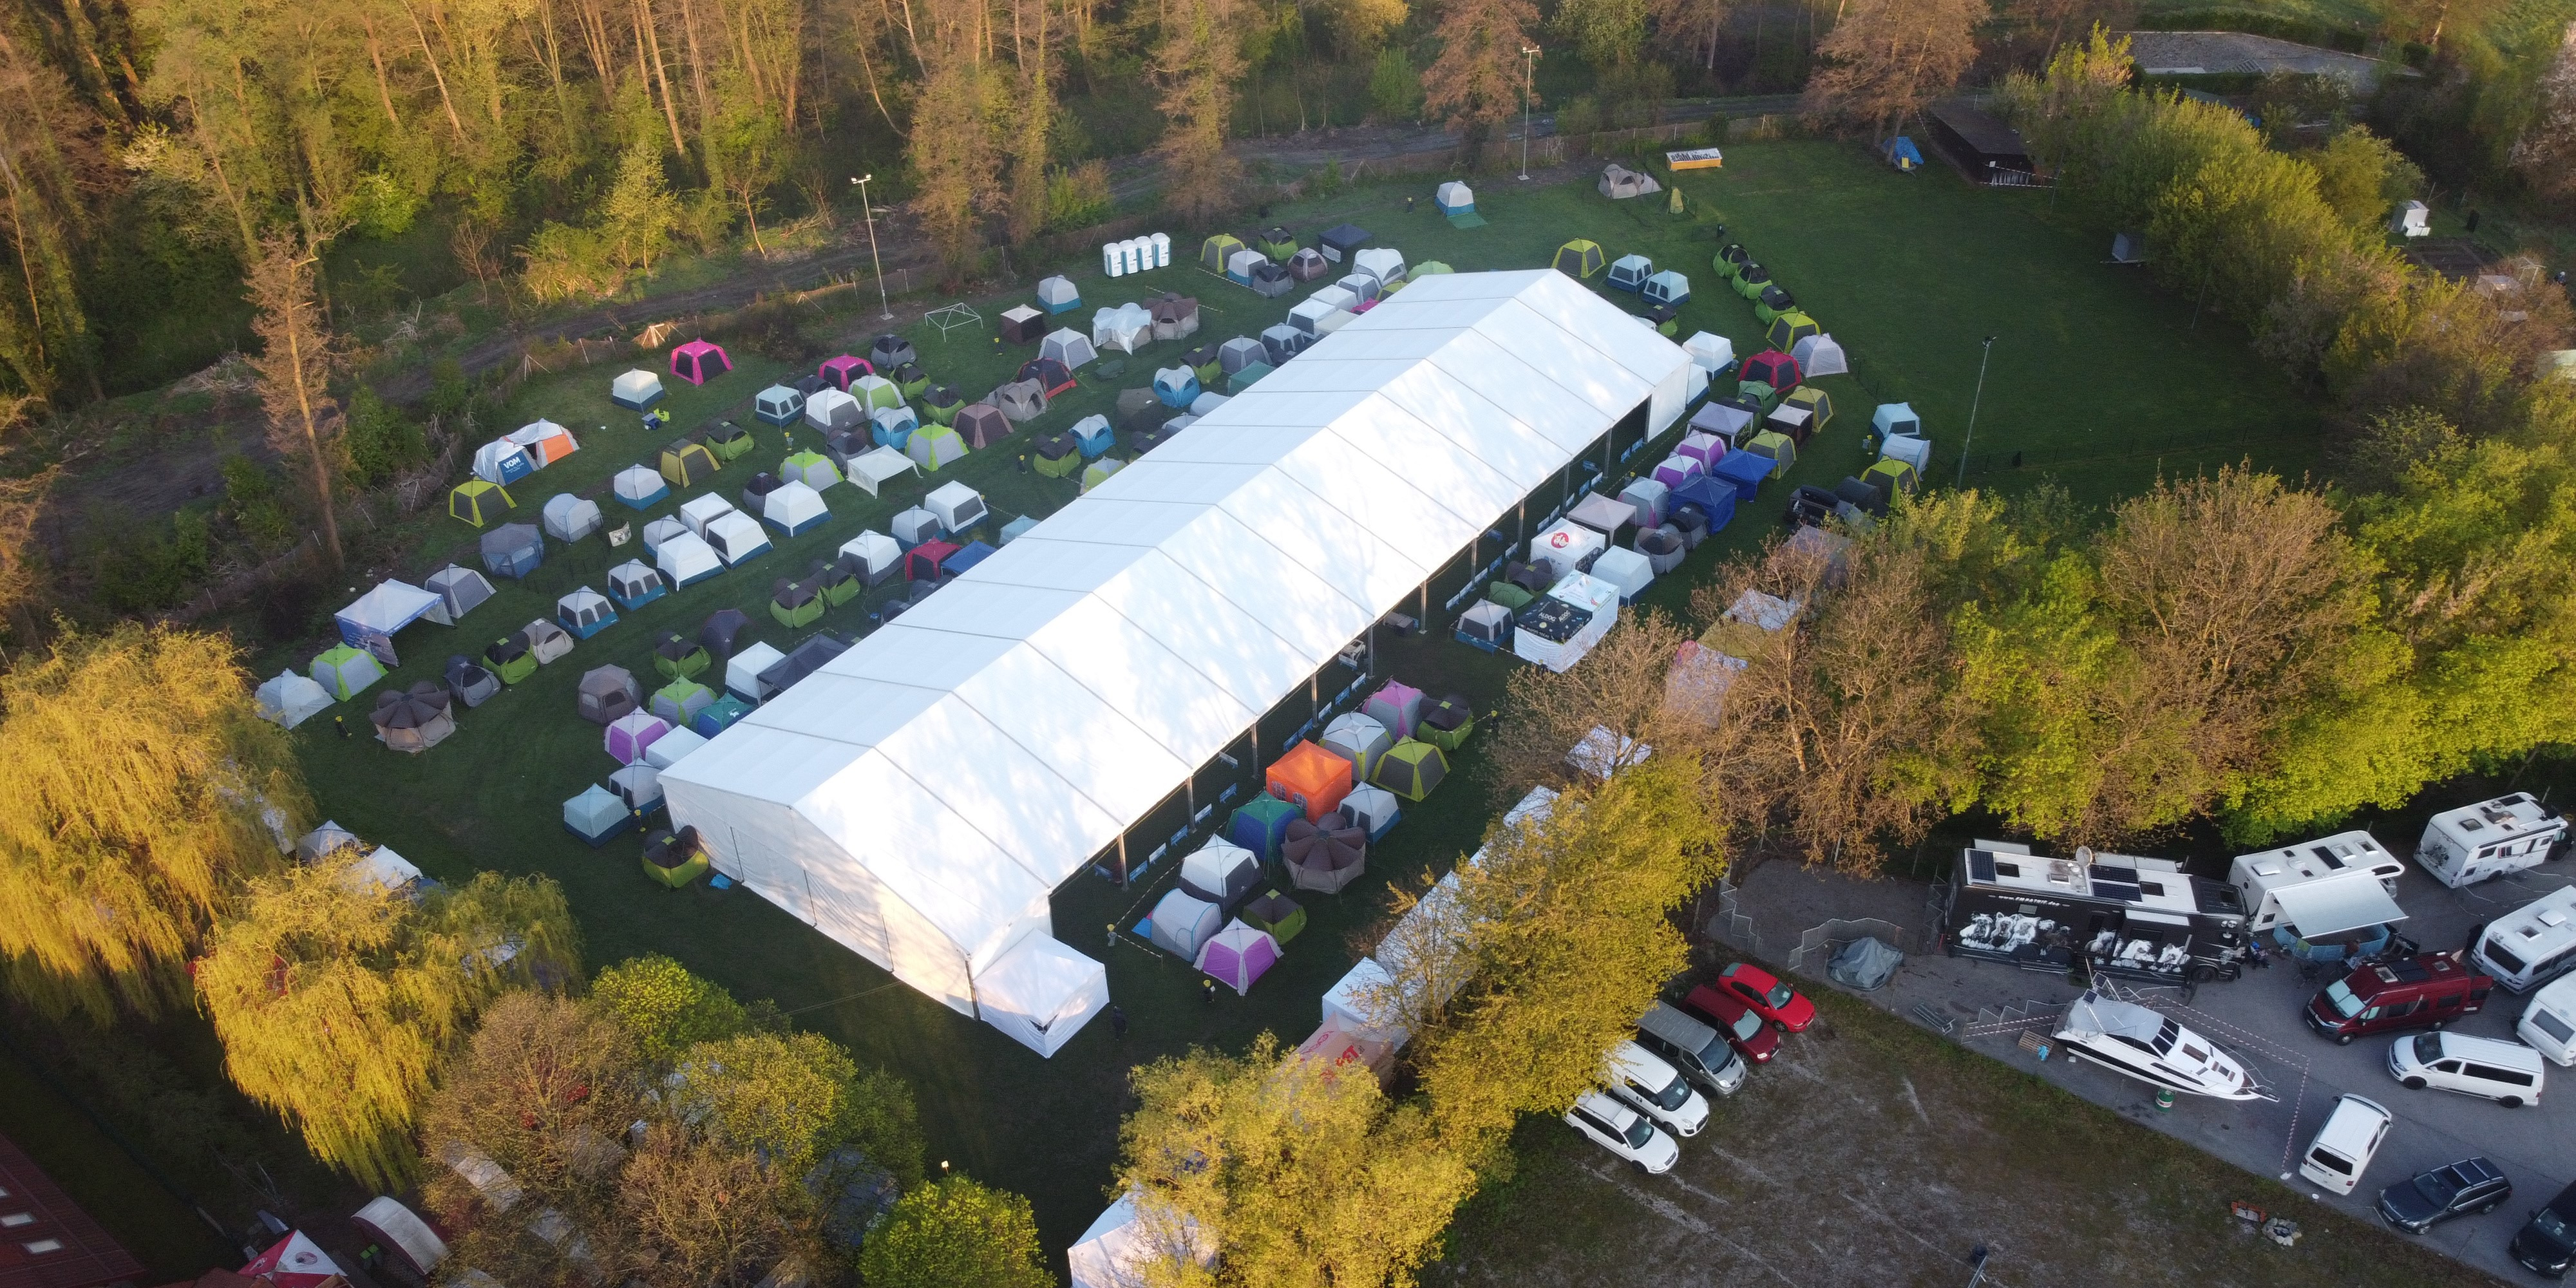 The aerial view of the venue located at the training grounds of the Maribor Cynological Club.